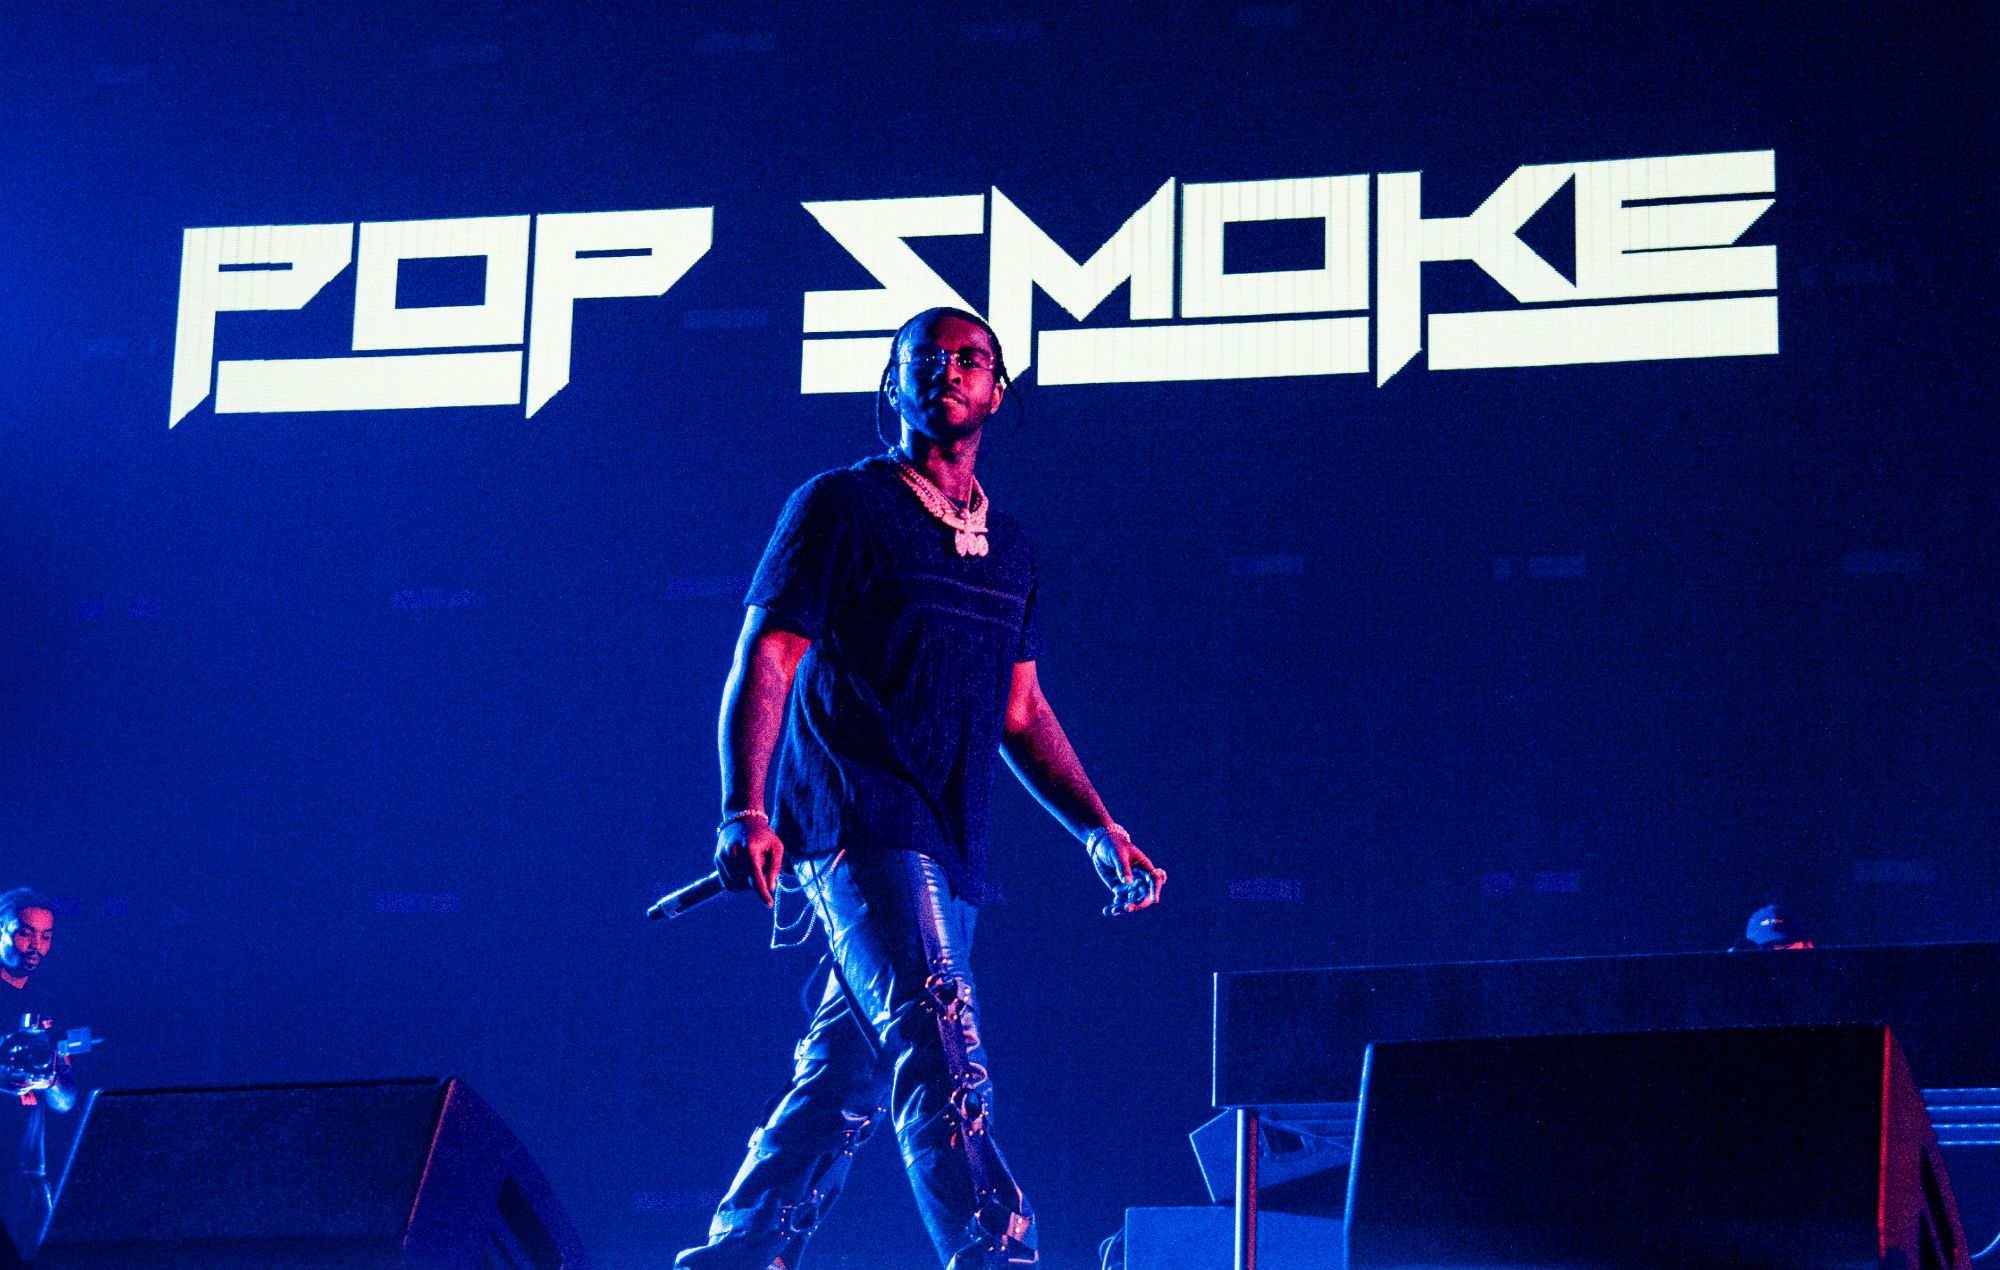 US rapper Pop Smoke has reportedly been killed